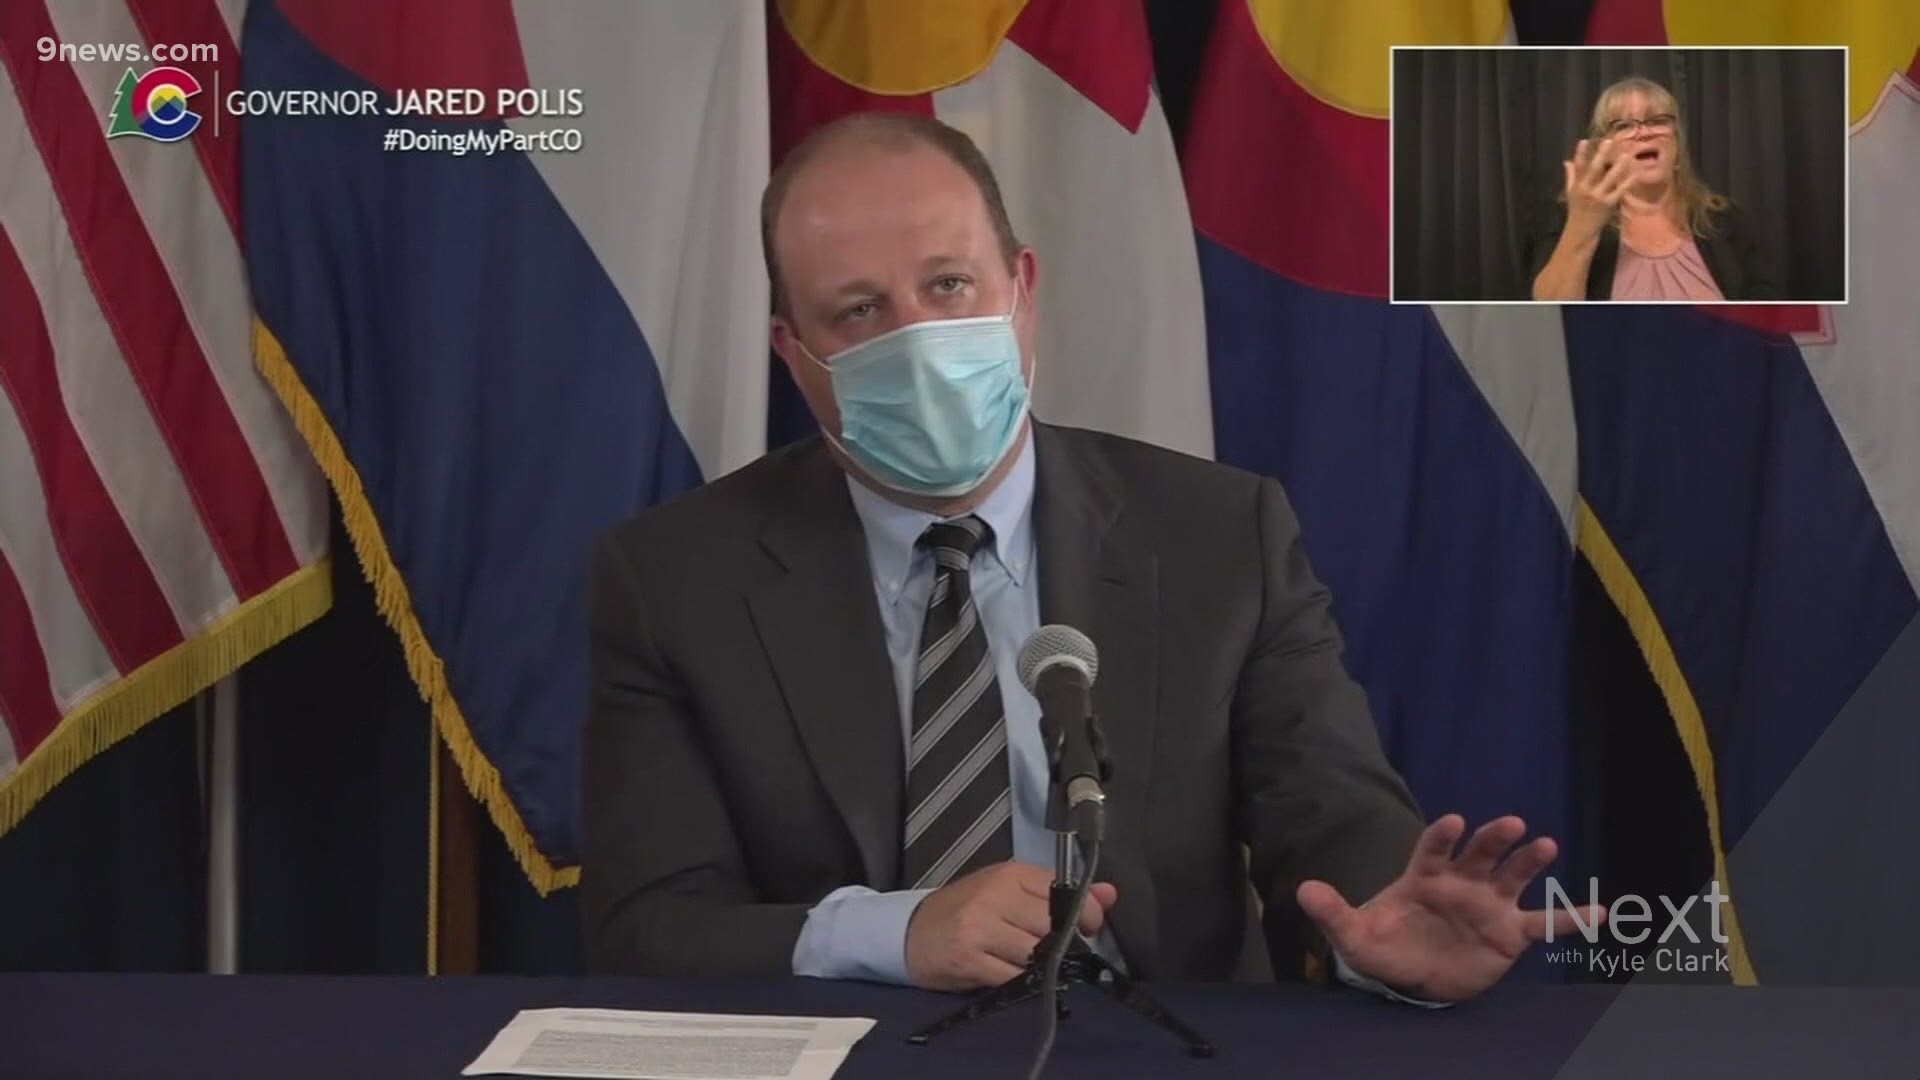 Gov. Jared Polis (D-Colorado) didn't answer a question about what metric would lead to lifting certain coronavirus restrictions.